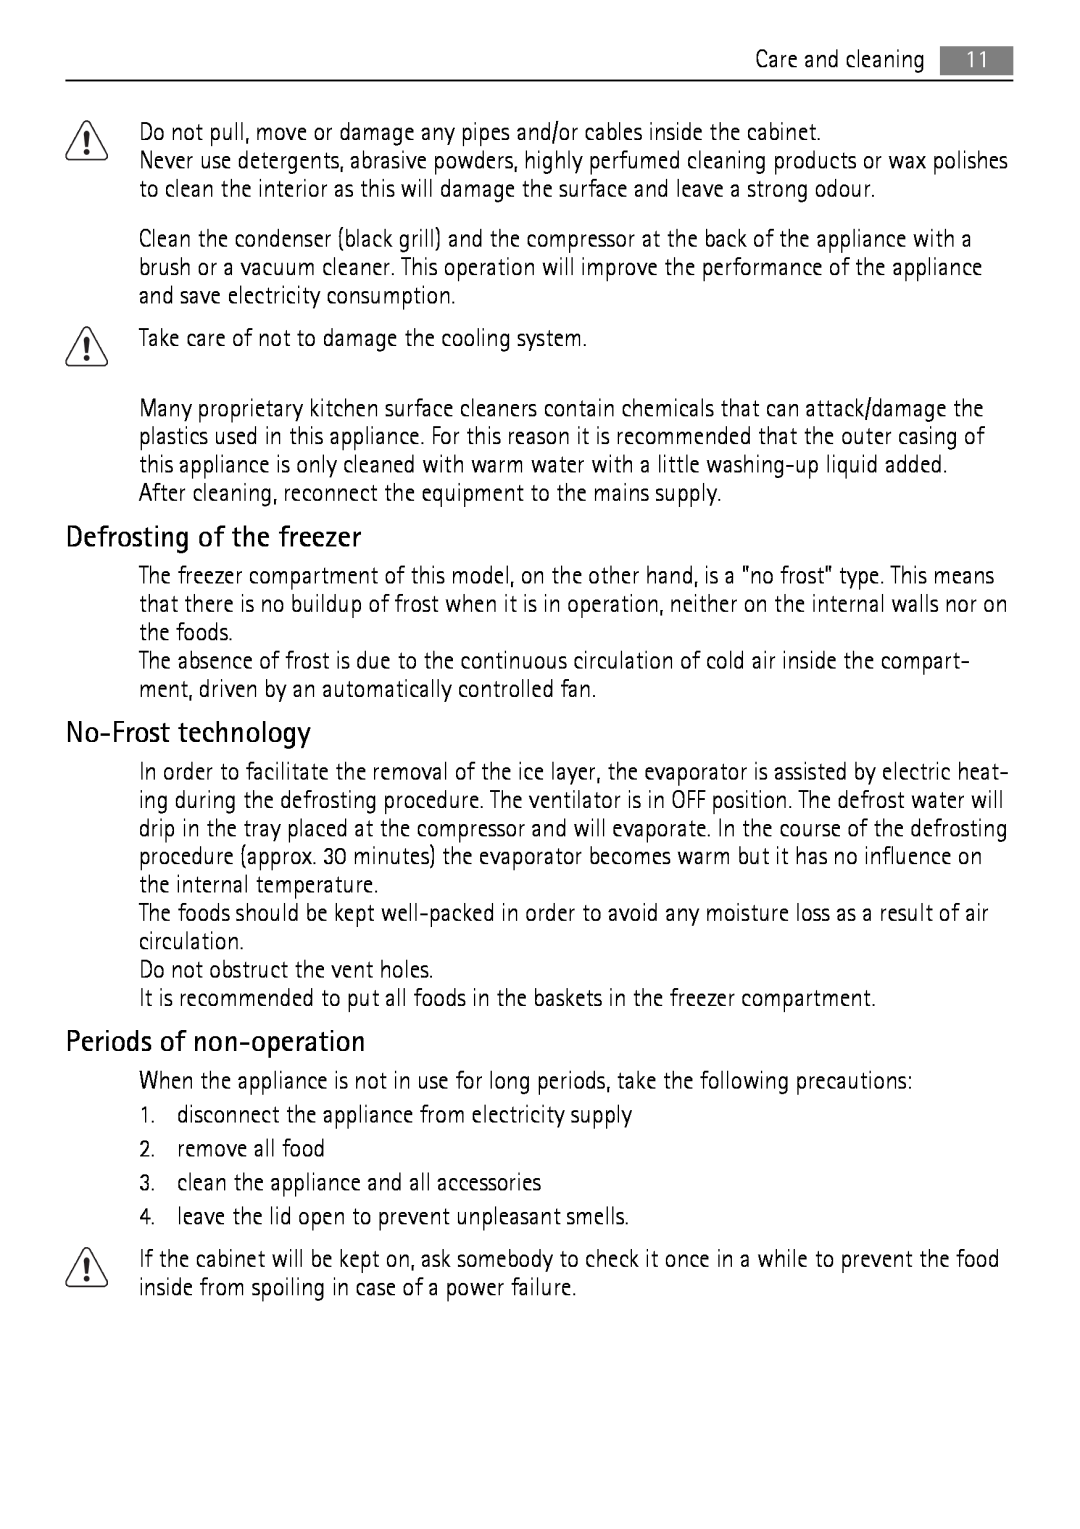 AEG A81000TNW0 user manual Defrosting of the freezer, No-Frosttechnology, Periods of non-operation 